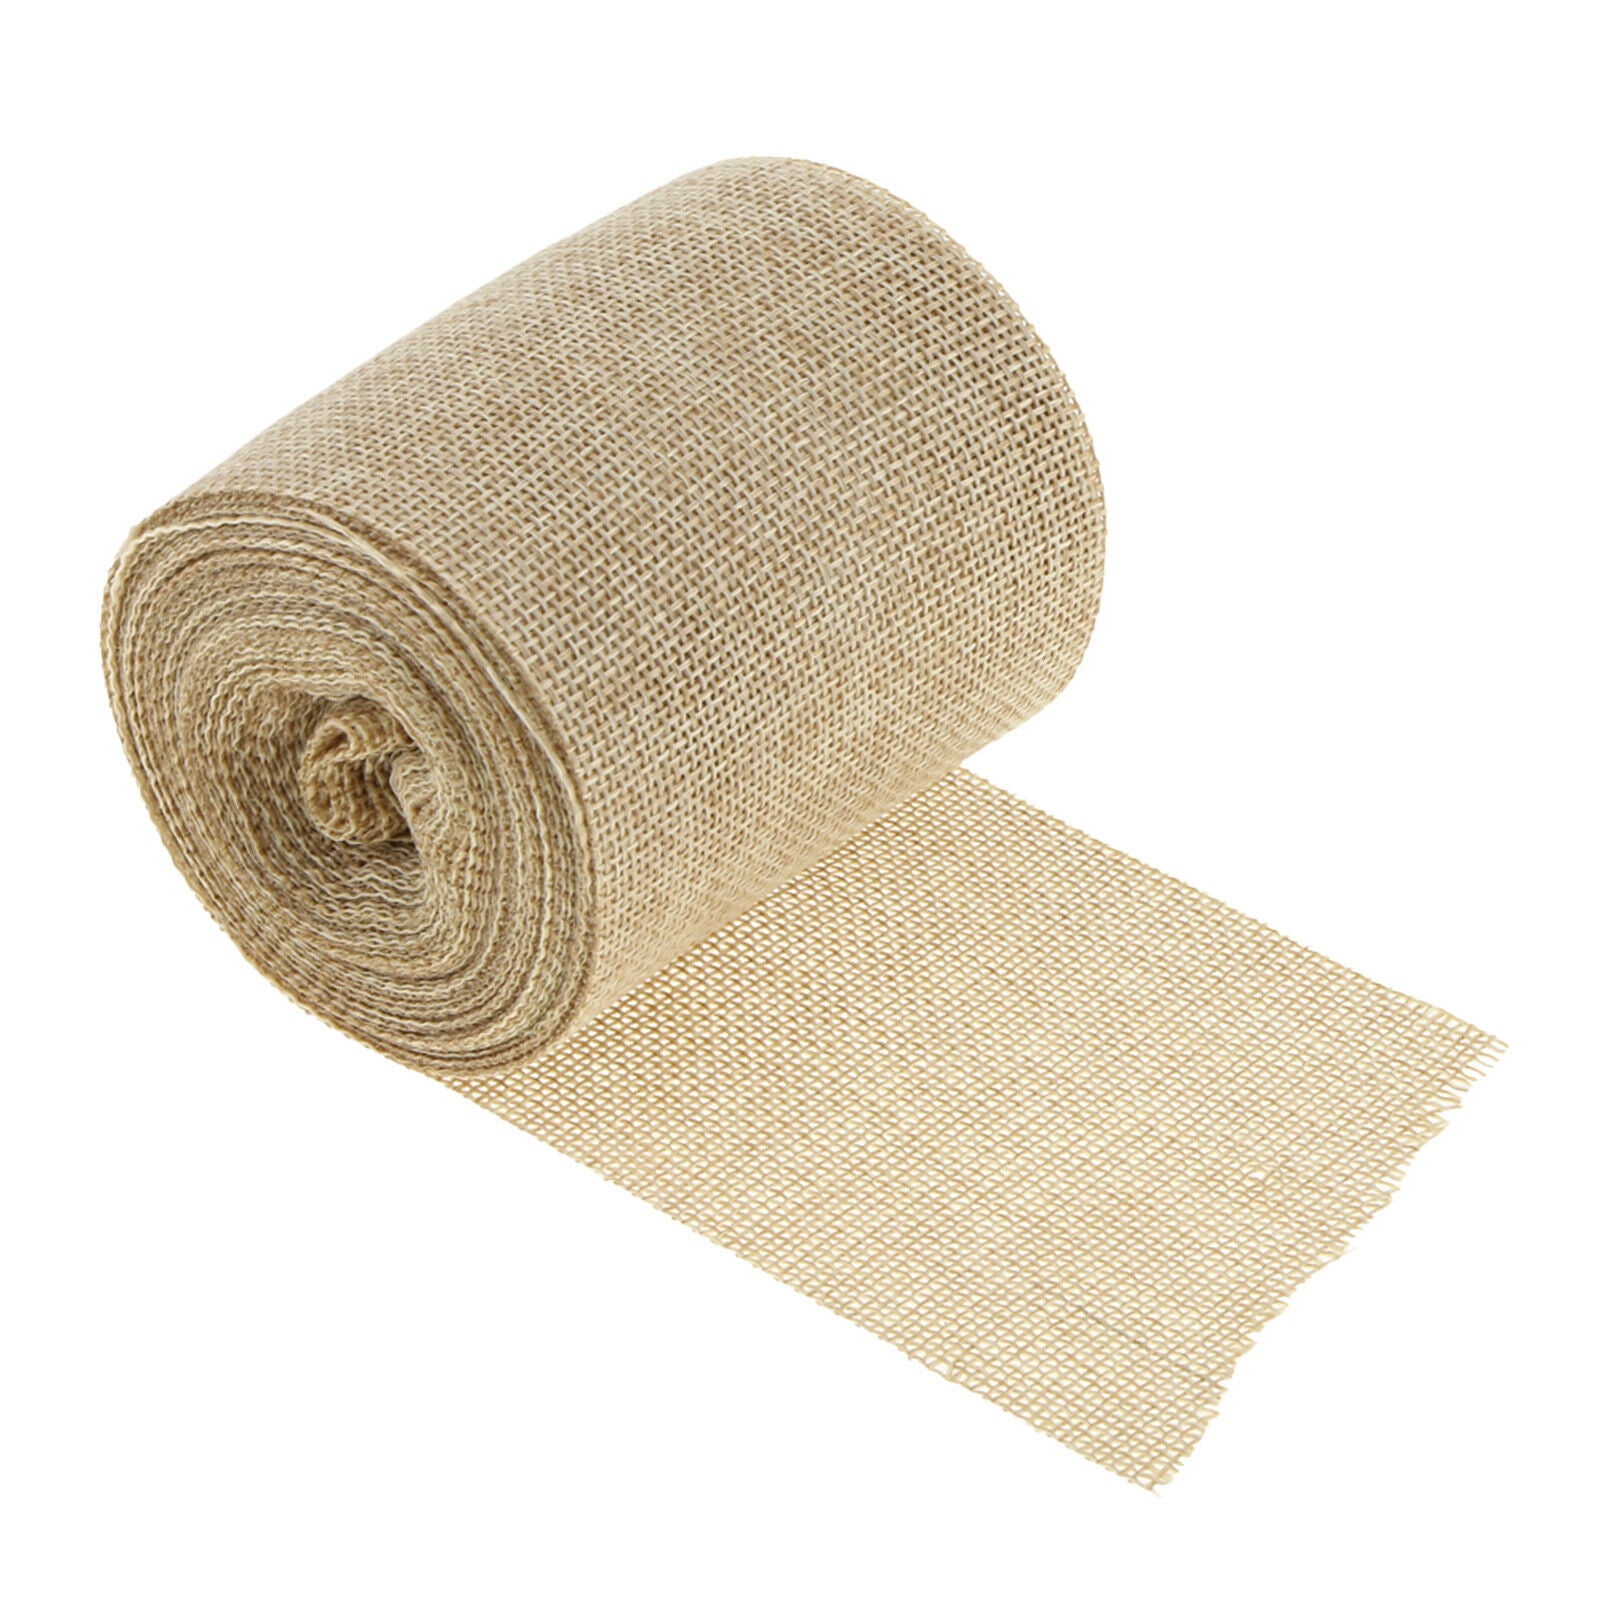 1 roll natural tape, 10 m rustic jute linen tape roll jute tape craft tape for